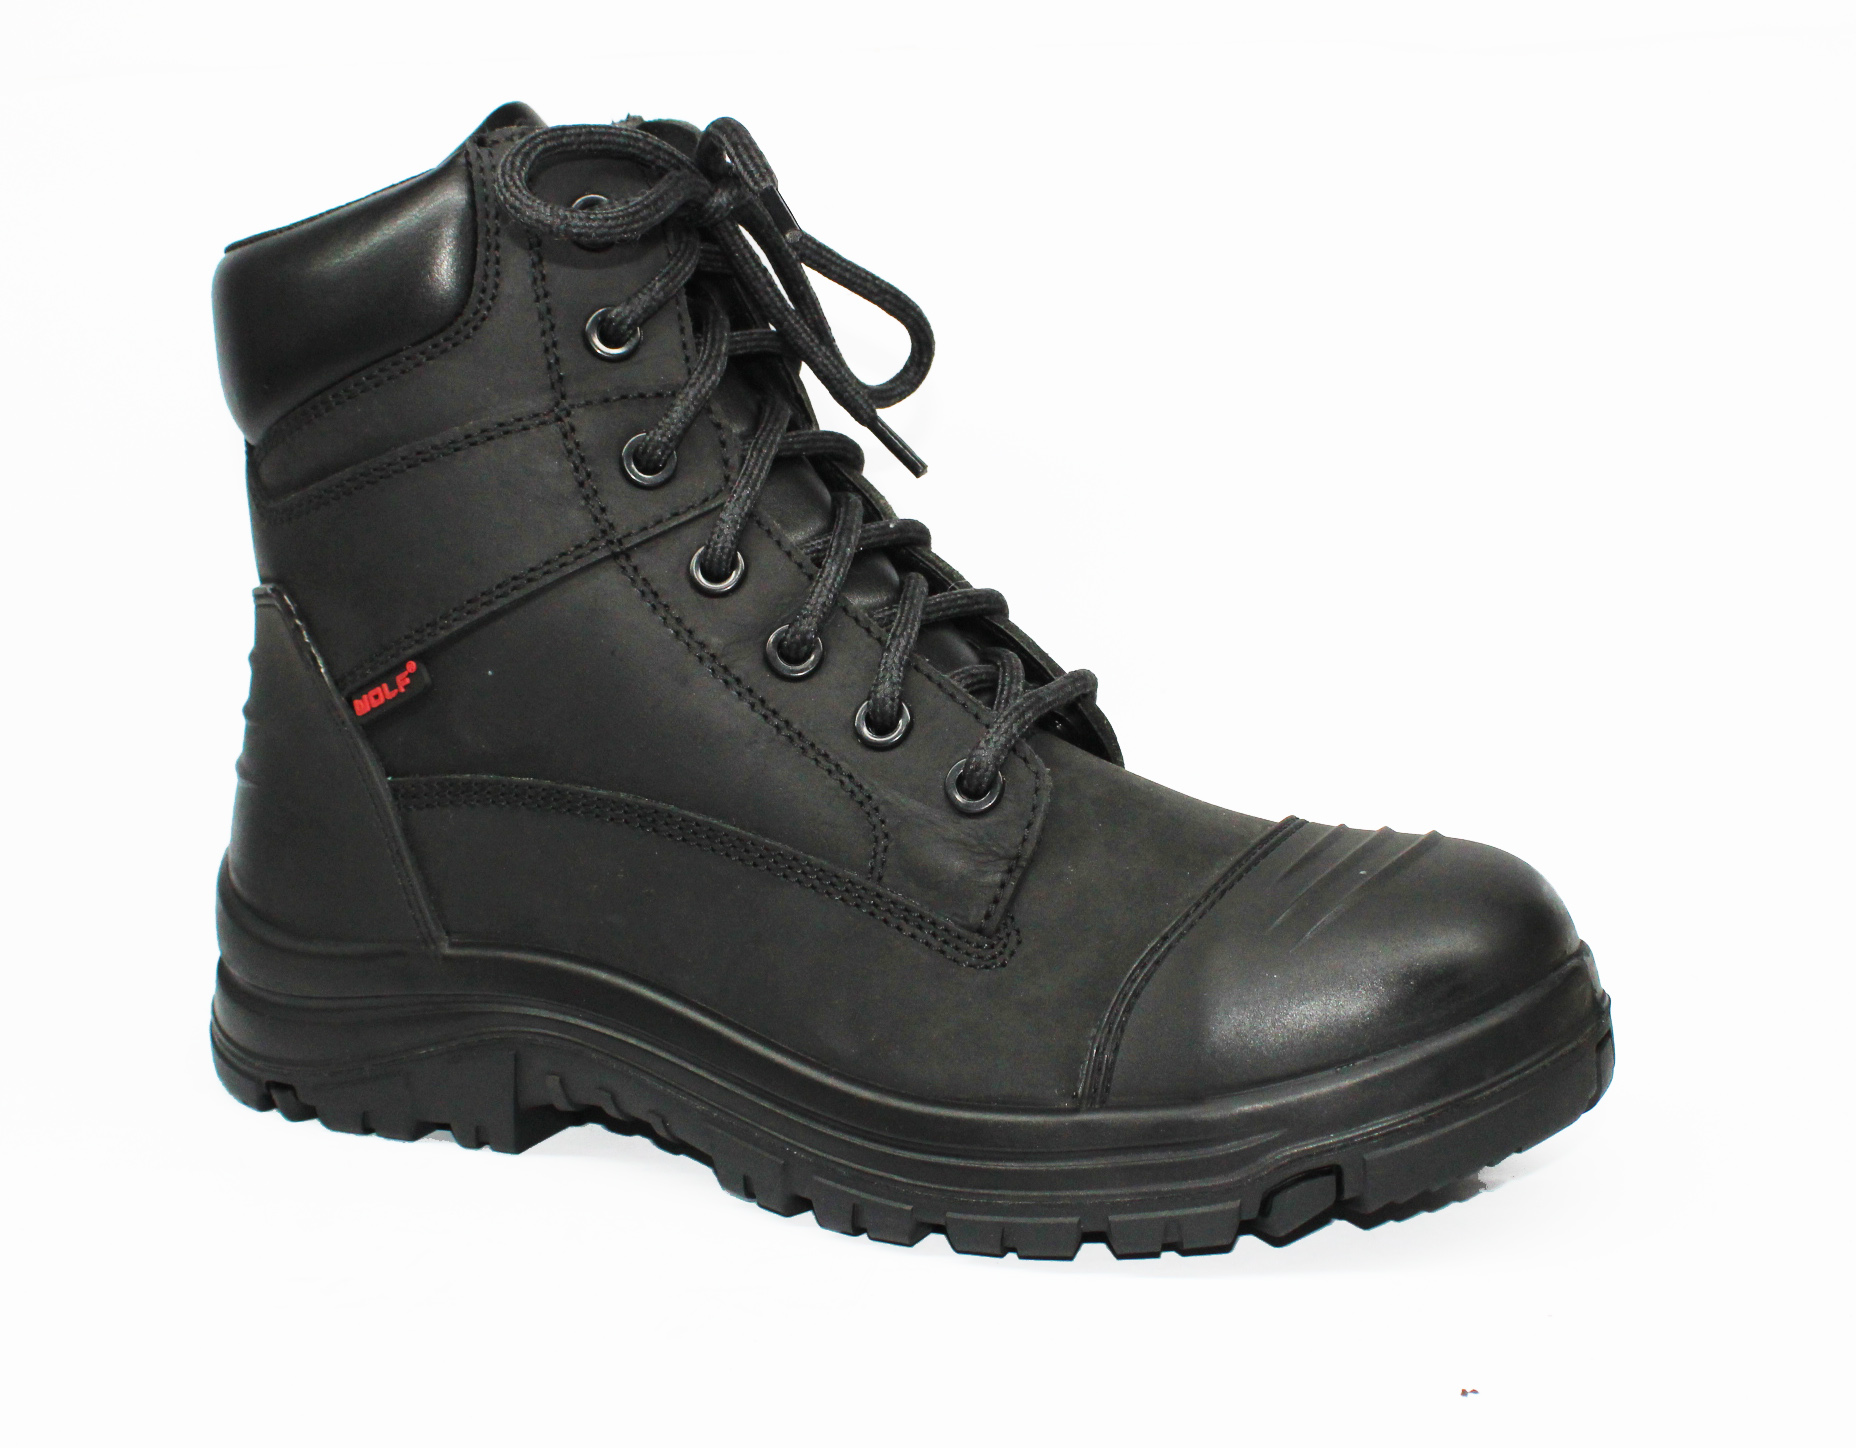 Double Density PU/Rubber, Metal Free, Waterproof Safety Boot